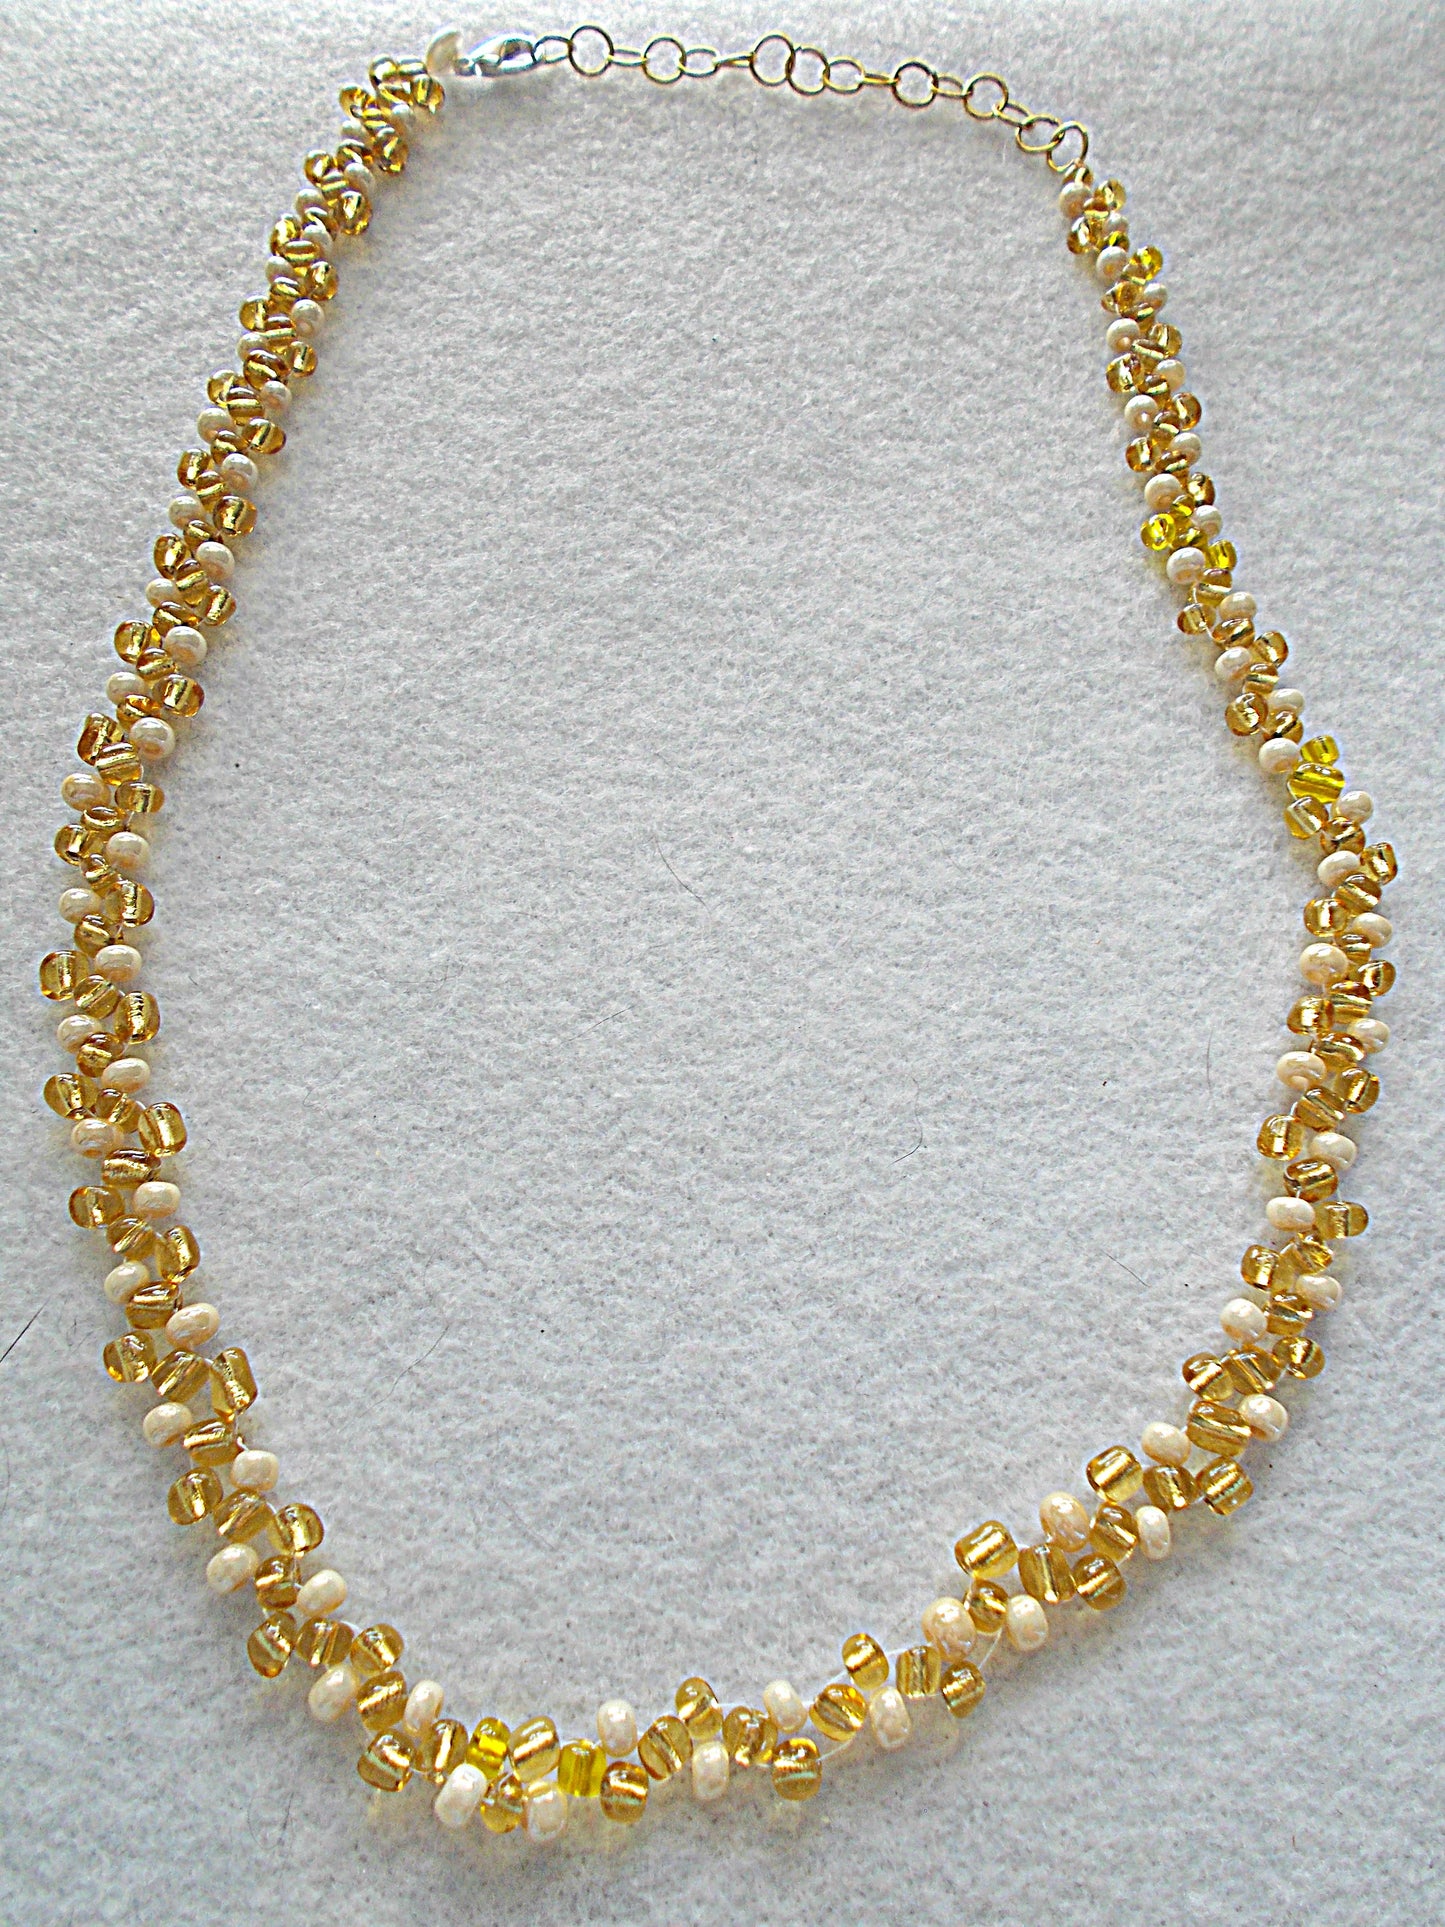 Right Angle Weave Gold and White Necklace